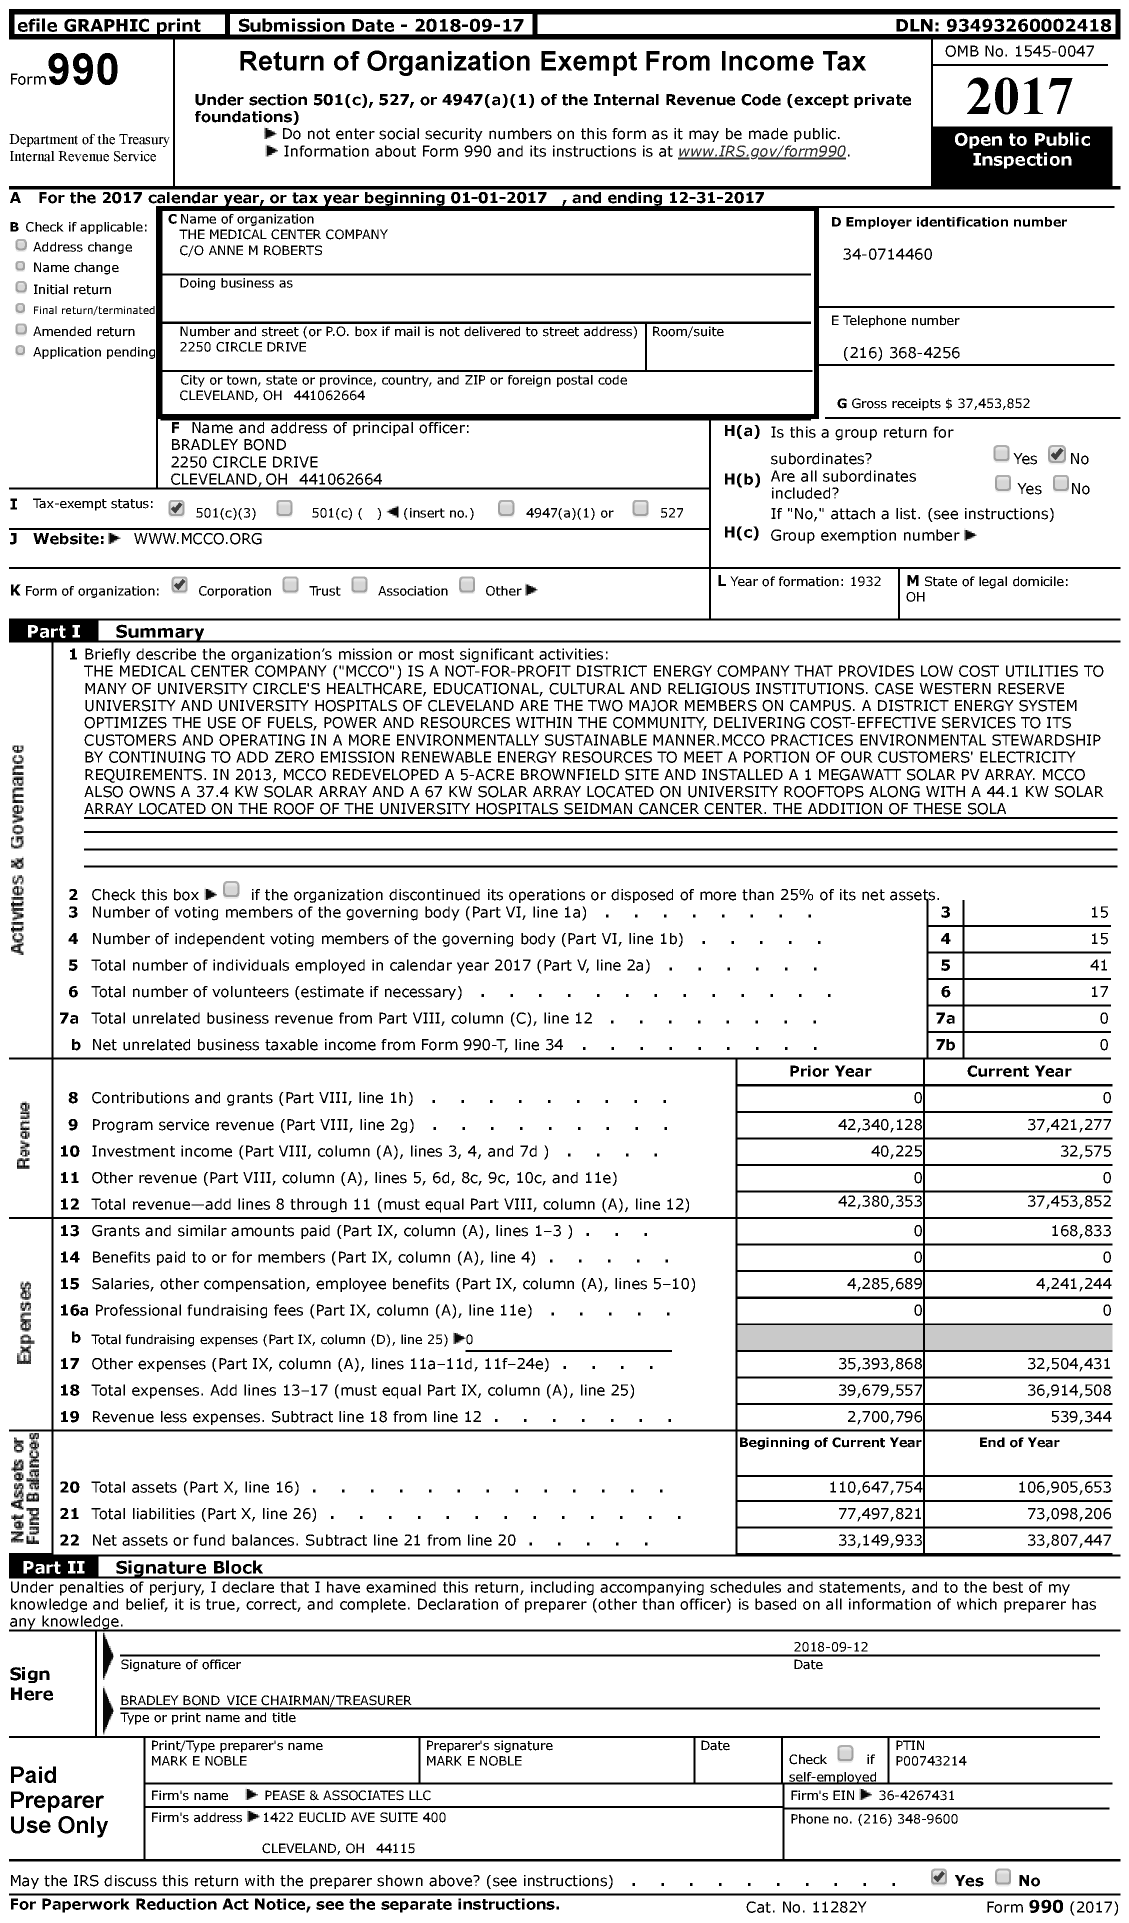 Image of first page of 2017 Form 990 for Medical Center Company (MCCo)